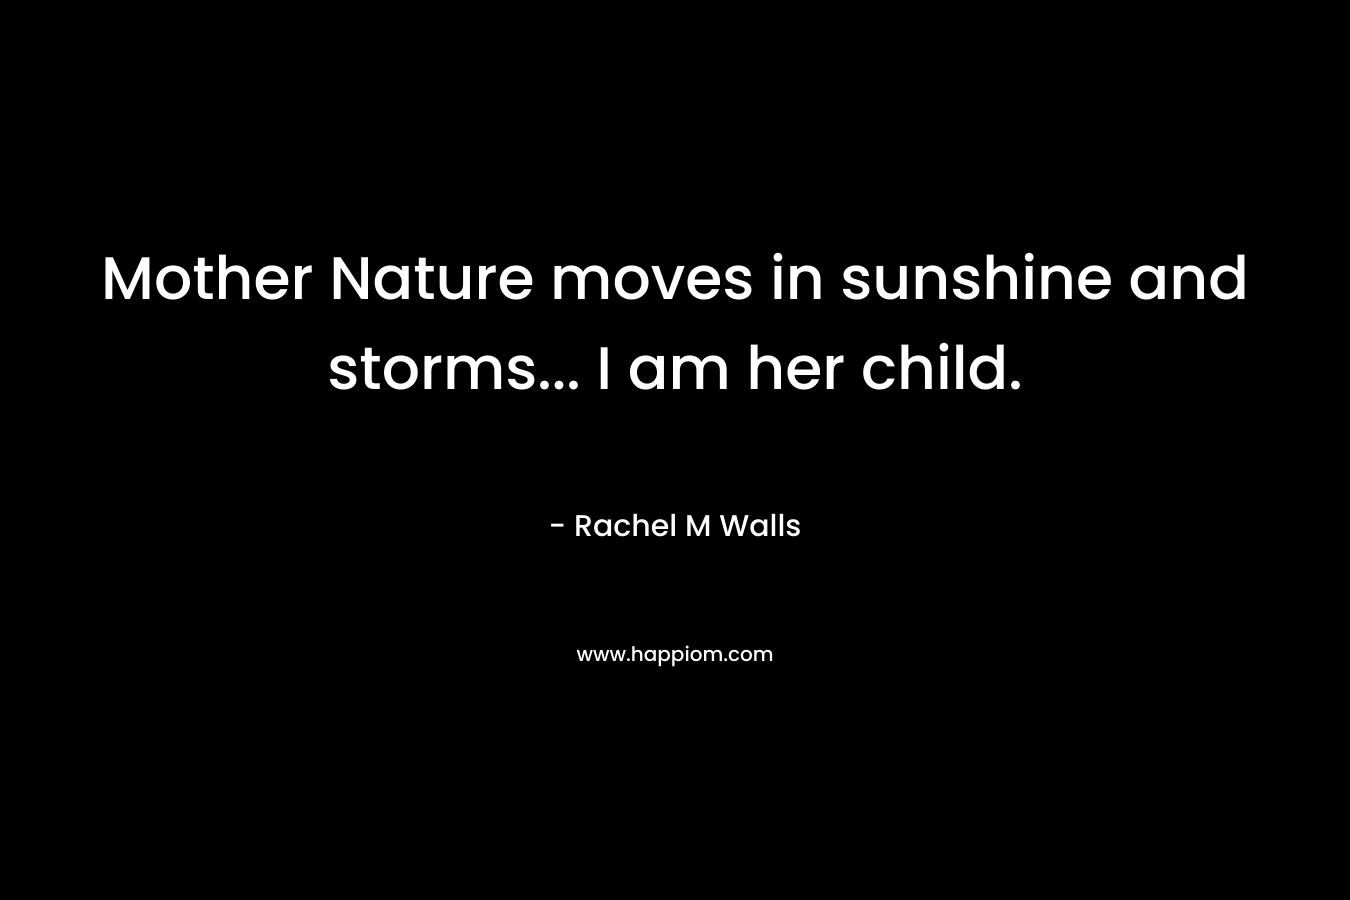 Mother Nature moves in sunshine and storms... I am her child.